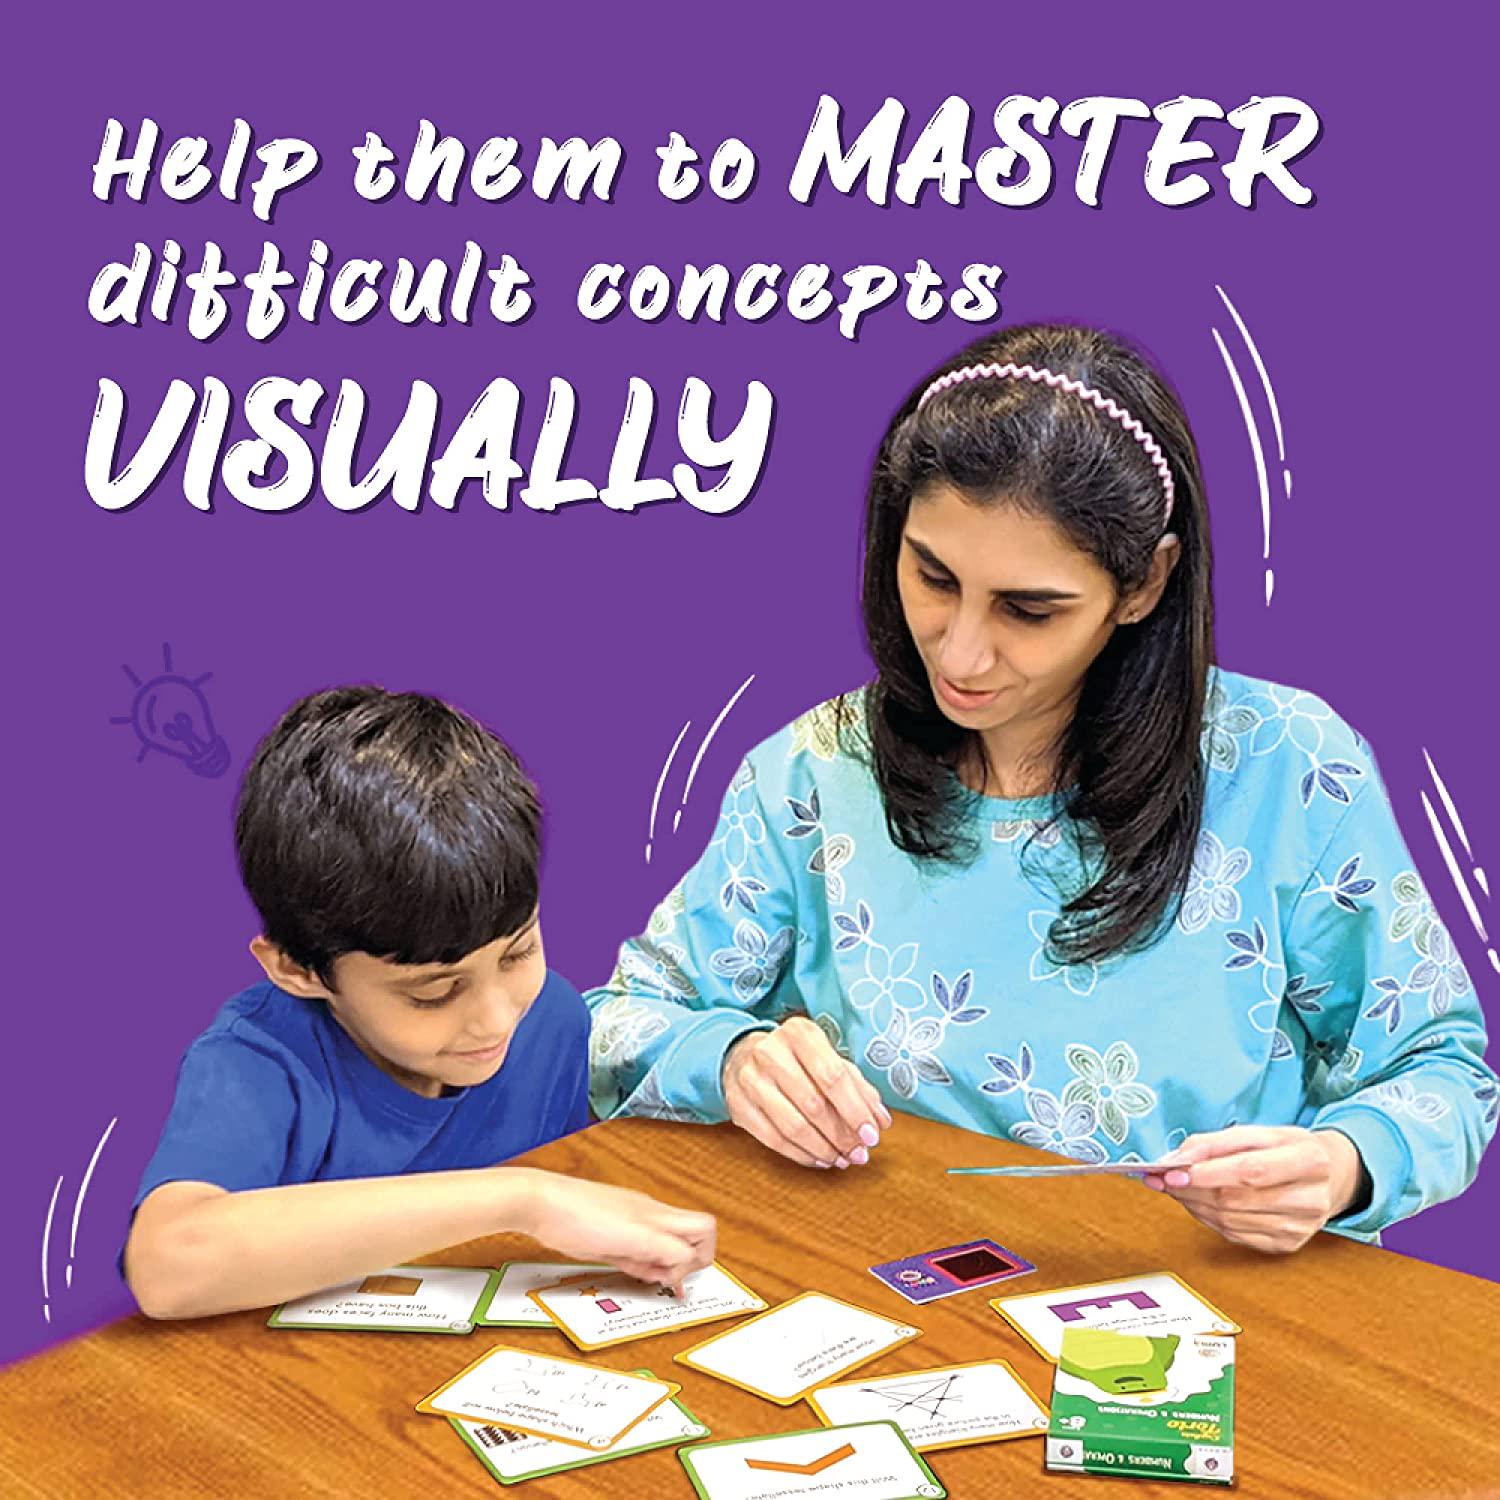 LUMA WORLD ADD LIFE TO LEARNING, Luma World Educational Flash Cards for Ages 8 and Up: Officer Teddy | Game-Based Maths Flash Cards with Magic Glass to View Hidden Answers | Learn Grade 3 Geometry and Patterns (Set of 50 Cards)